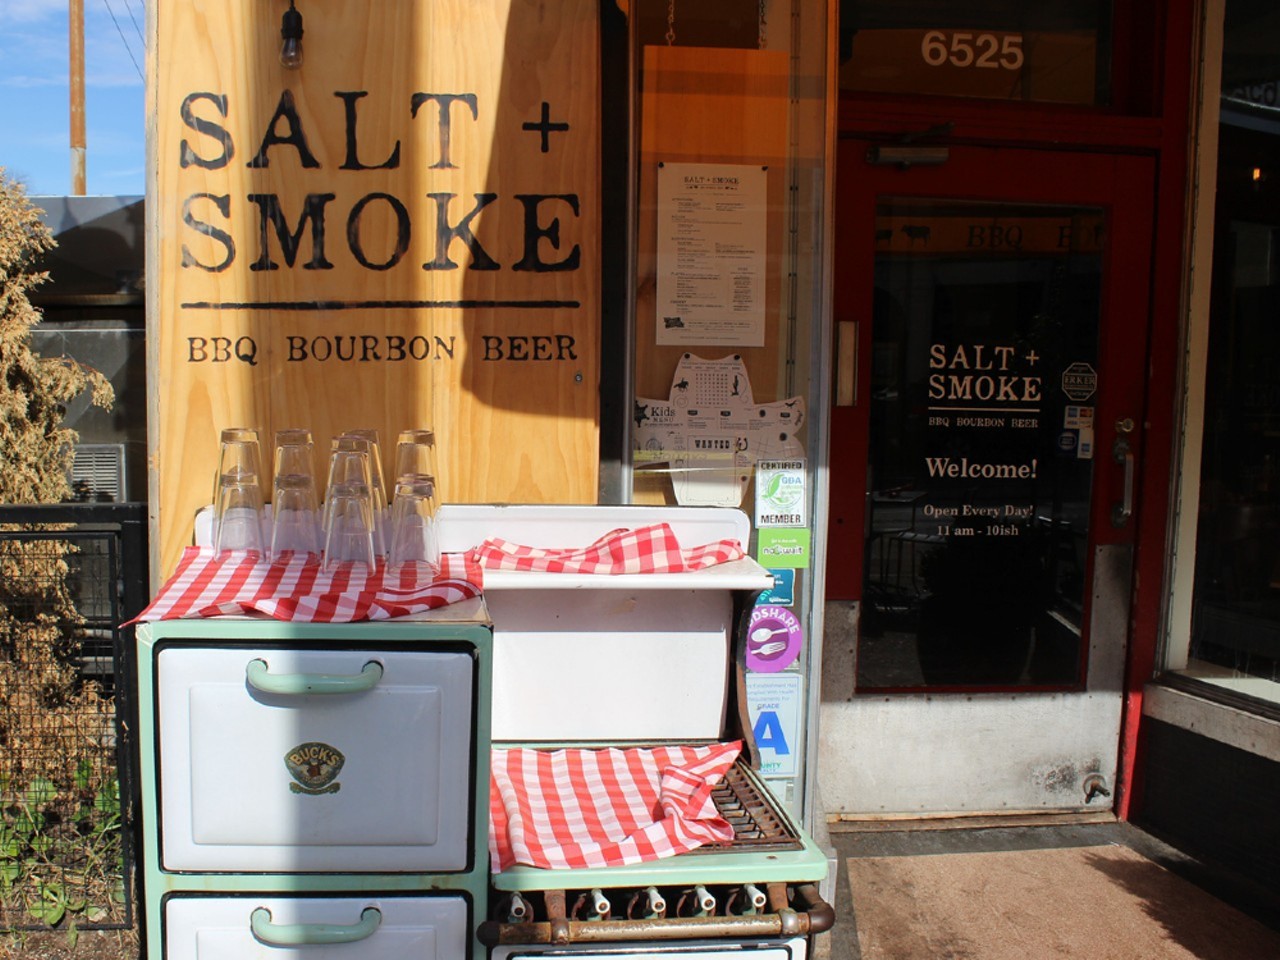 Salt + Smoke
Salt + Smoke (6525 Delmar Boulevard, University City; 314-727-0200) serves the best brisket in town. That’s not controversial. What may be a little more contentious, though, is an even bolder statement — Salt + Smoke serves some of the best brisket in the country.